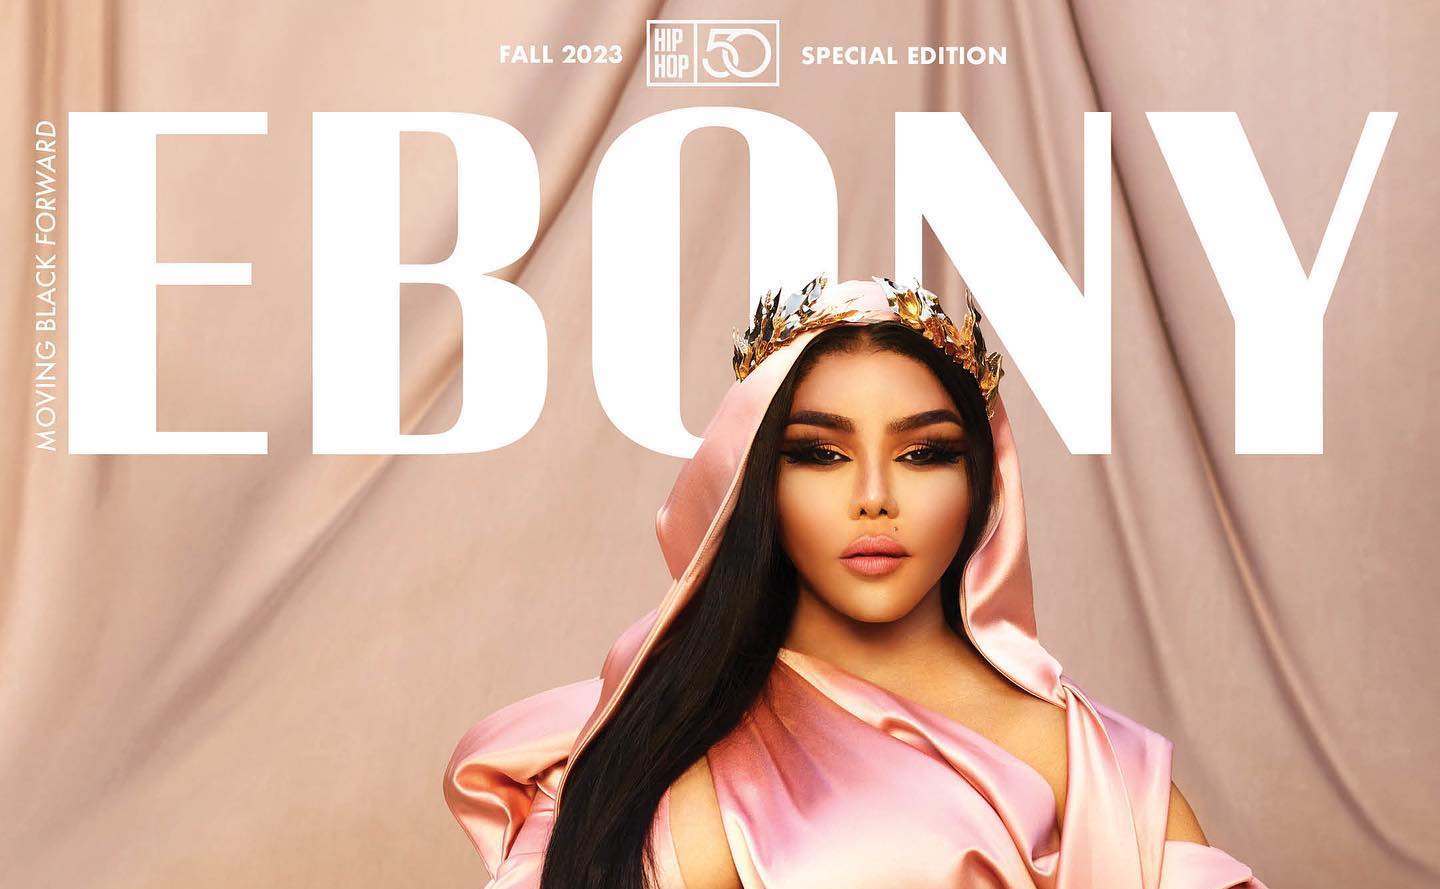 Lil Kim Covers Ebony / Photographer Responds to Fan Confusion